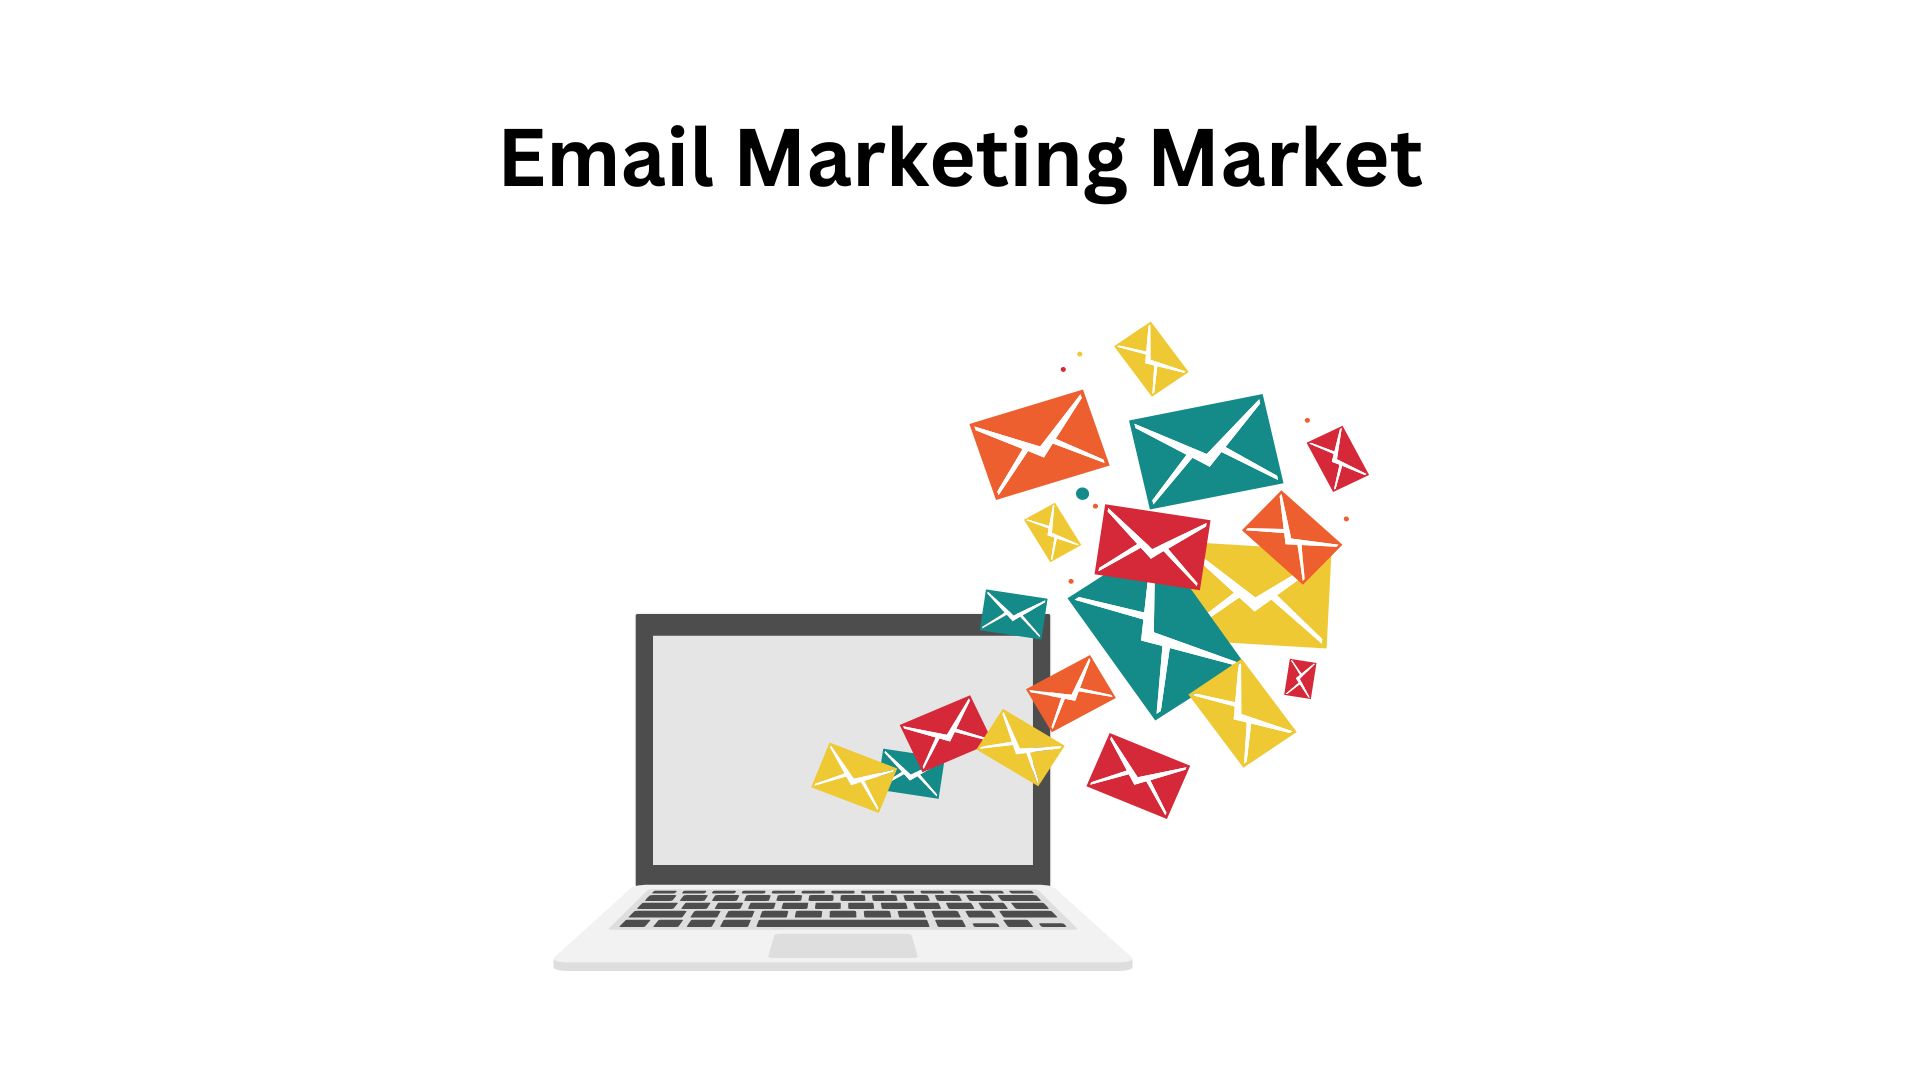 Email Marketing Market To Grow At A Remarkable CAGR Of 14.0% During the Forecast 2032